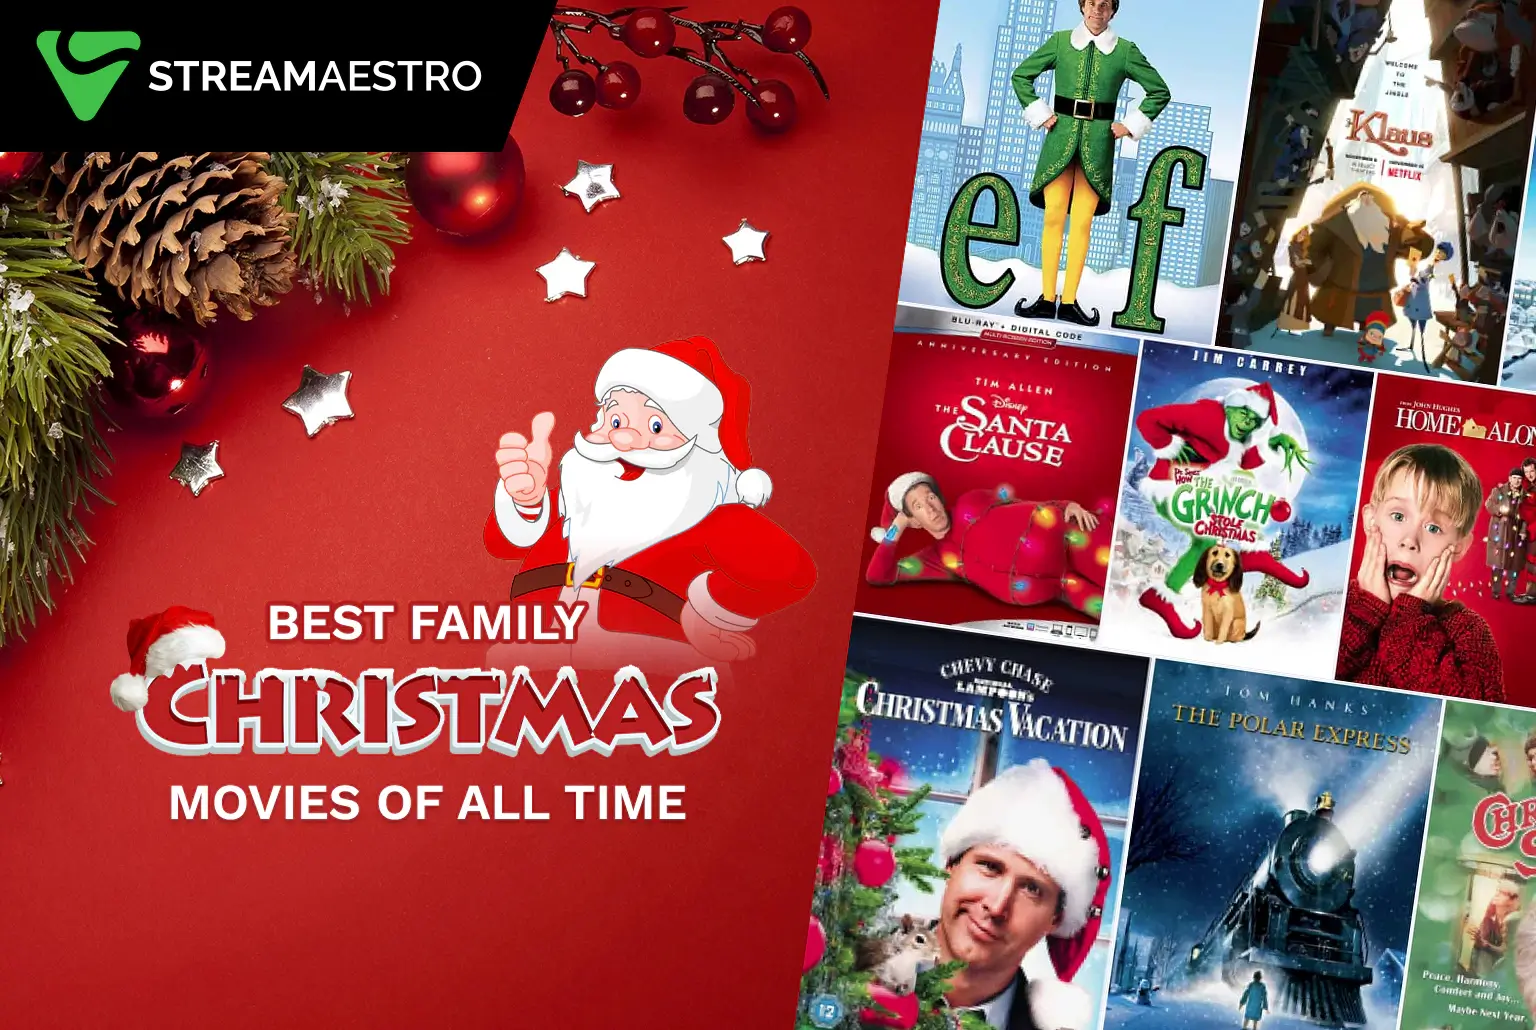 Best Family Christmas Movies